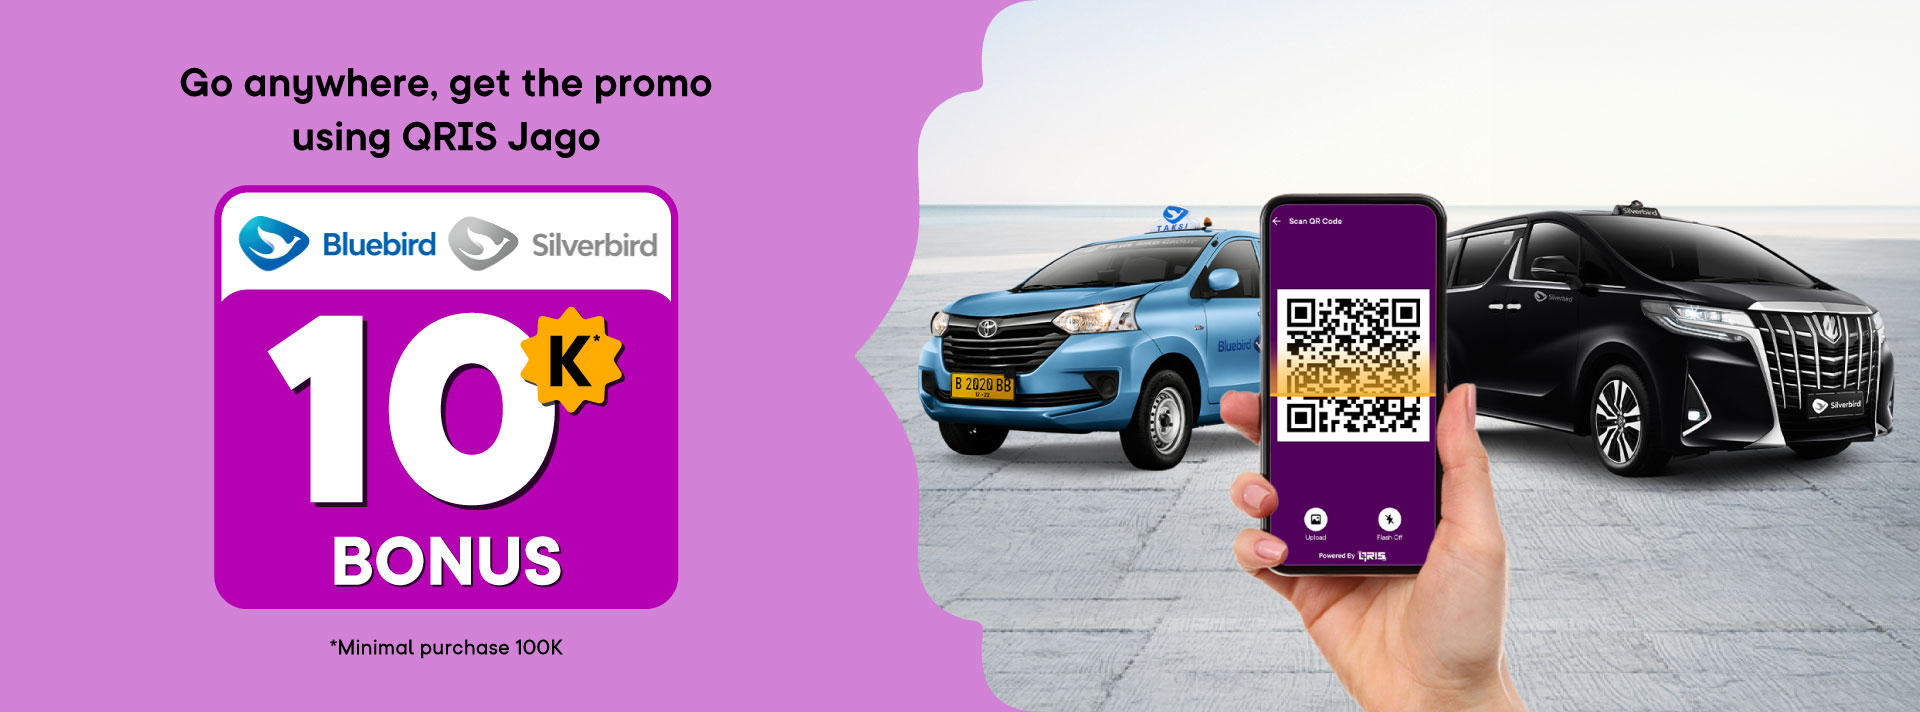 Rp10,000 cashback for paying your taxi fare using Jago QRIS